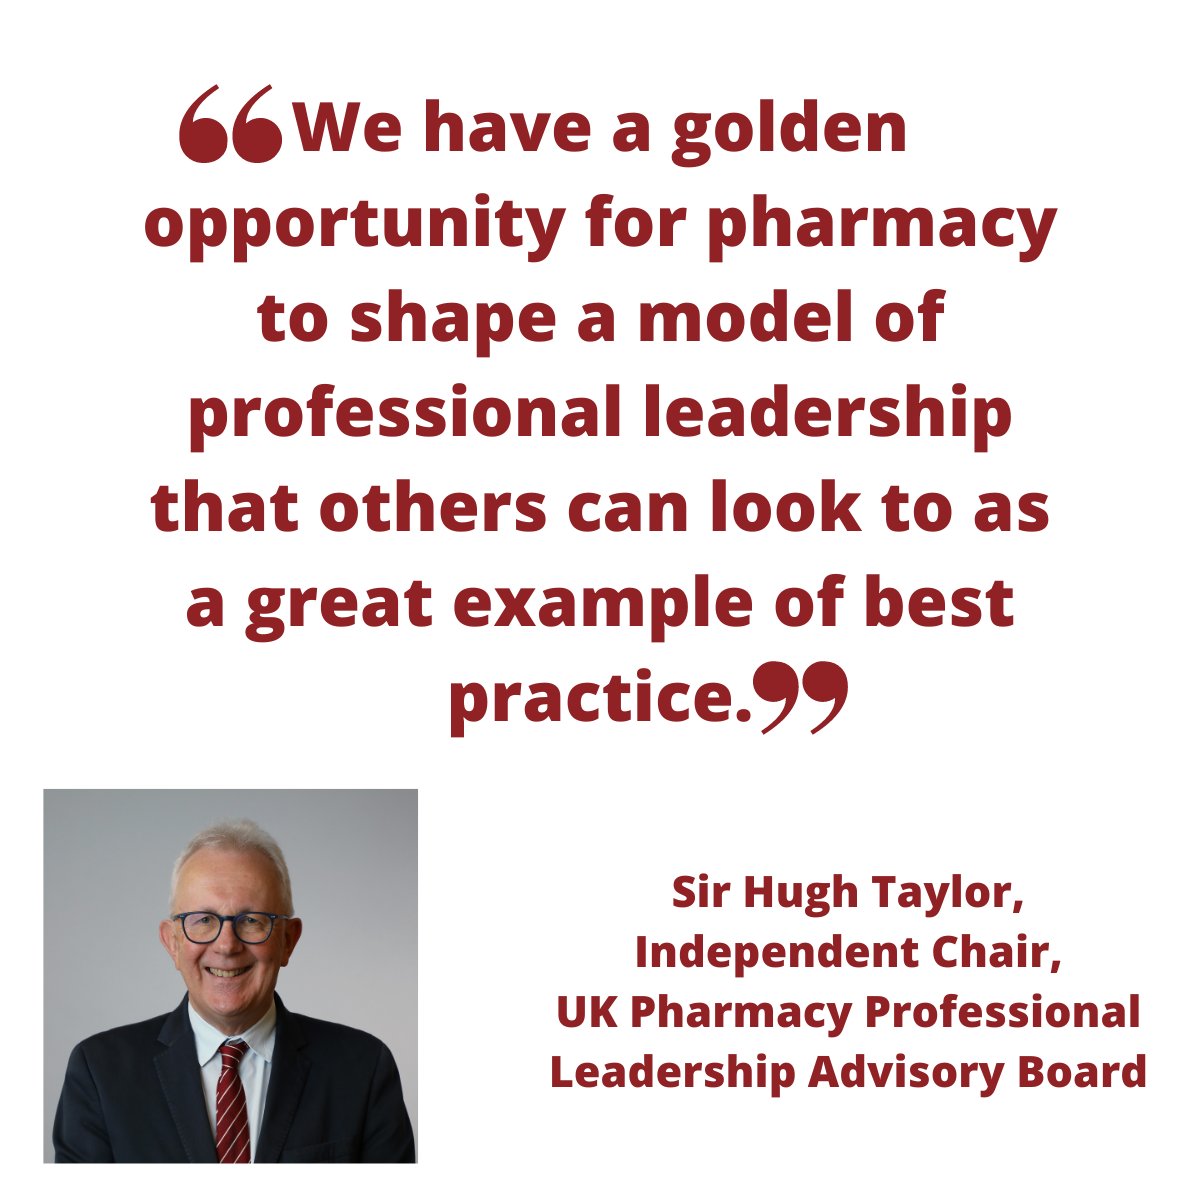 After very positive discussions at our first quarterly meeting, @UKPPLBoard has published a statement, ToR, member biographies & a blog by Independent Chair Sir Hugh Taylor: jointheconversation.scwcsu.nhs.uk/pharmacy-profe…